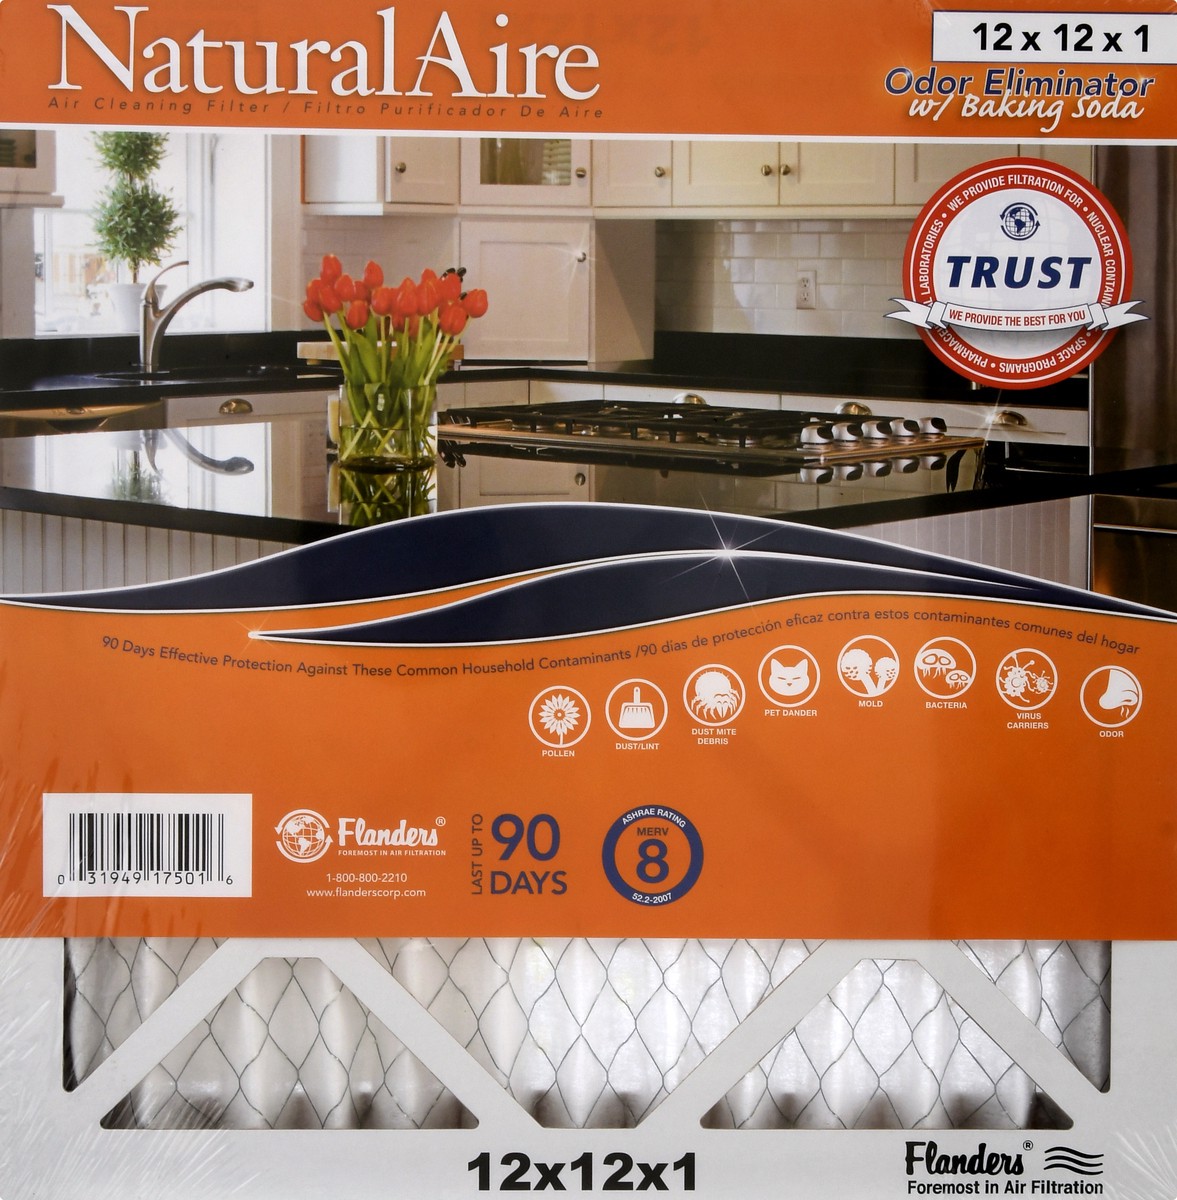 slide 6 of 11, NaturalAire 12" x 12" x 1" Air Cleaning Filter Odor Eliminator With Baking Soda, LG